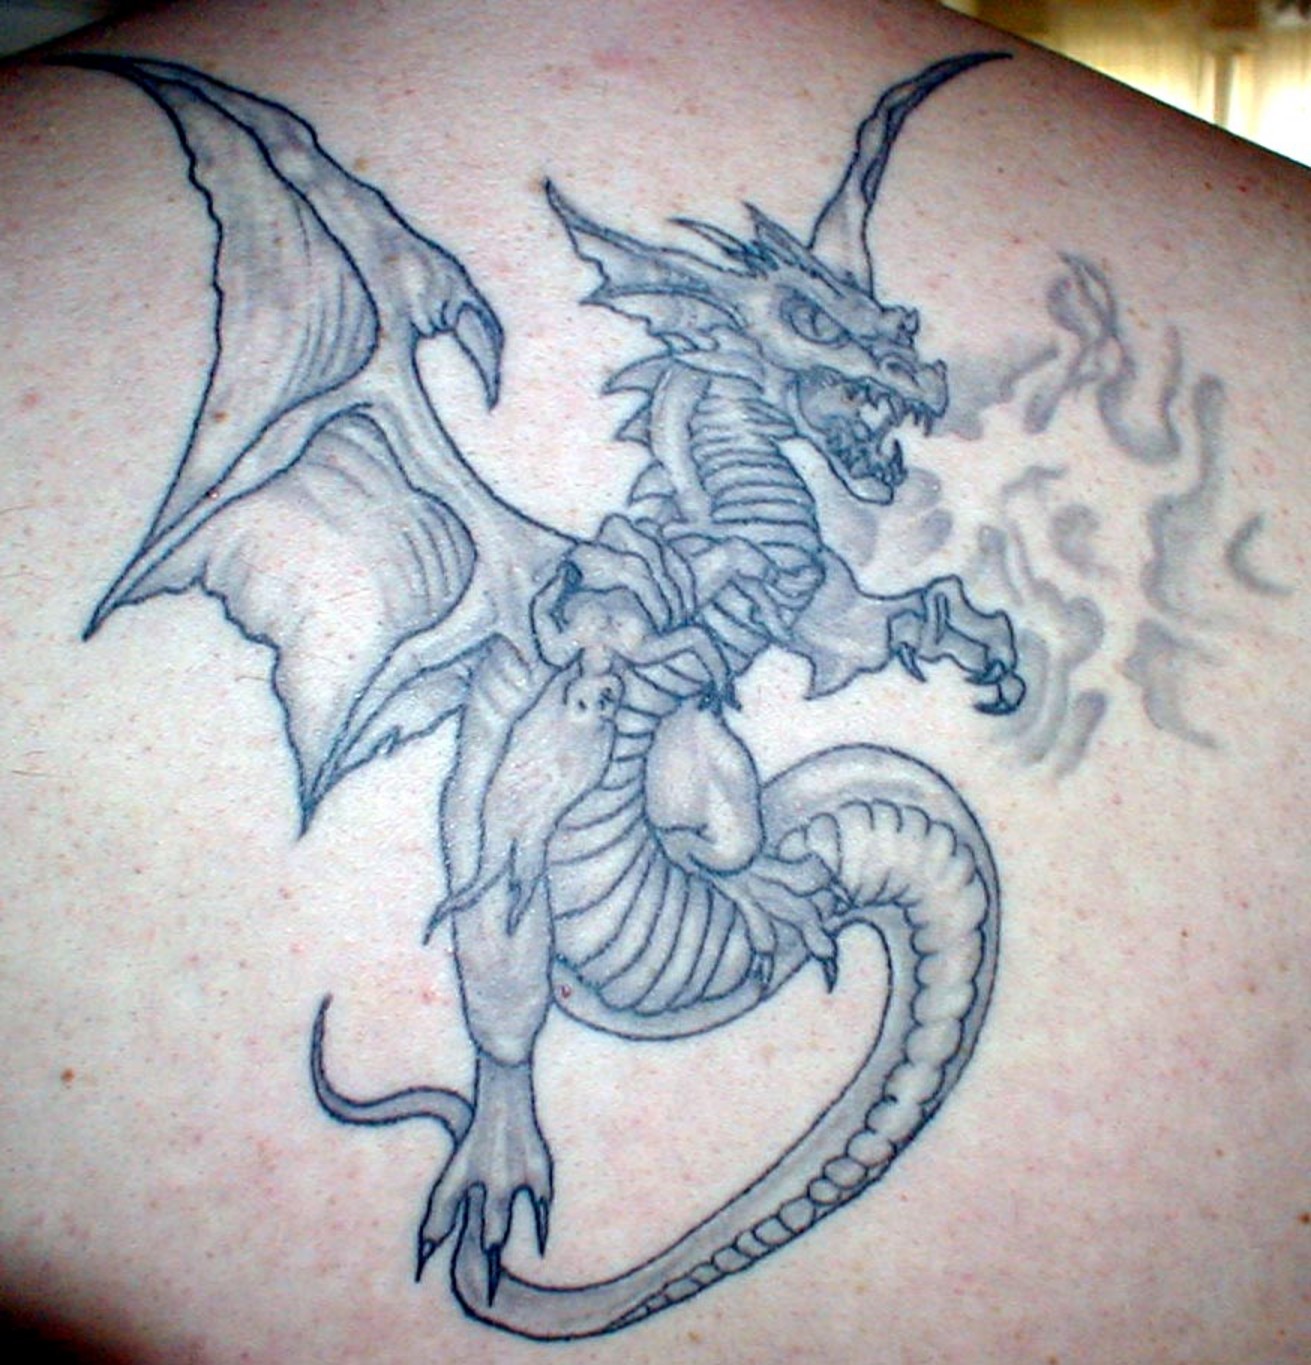 Dragon Tattoos Designs, Ideas and Meaning | Tattoos For You